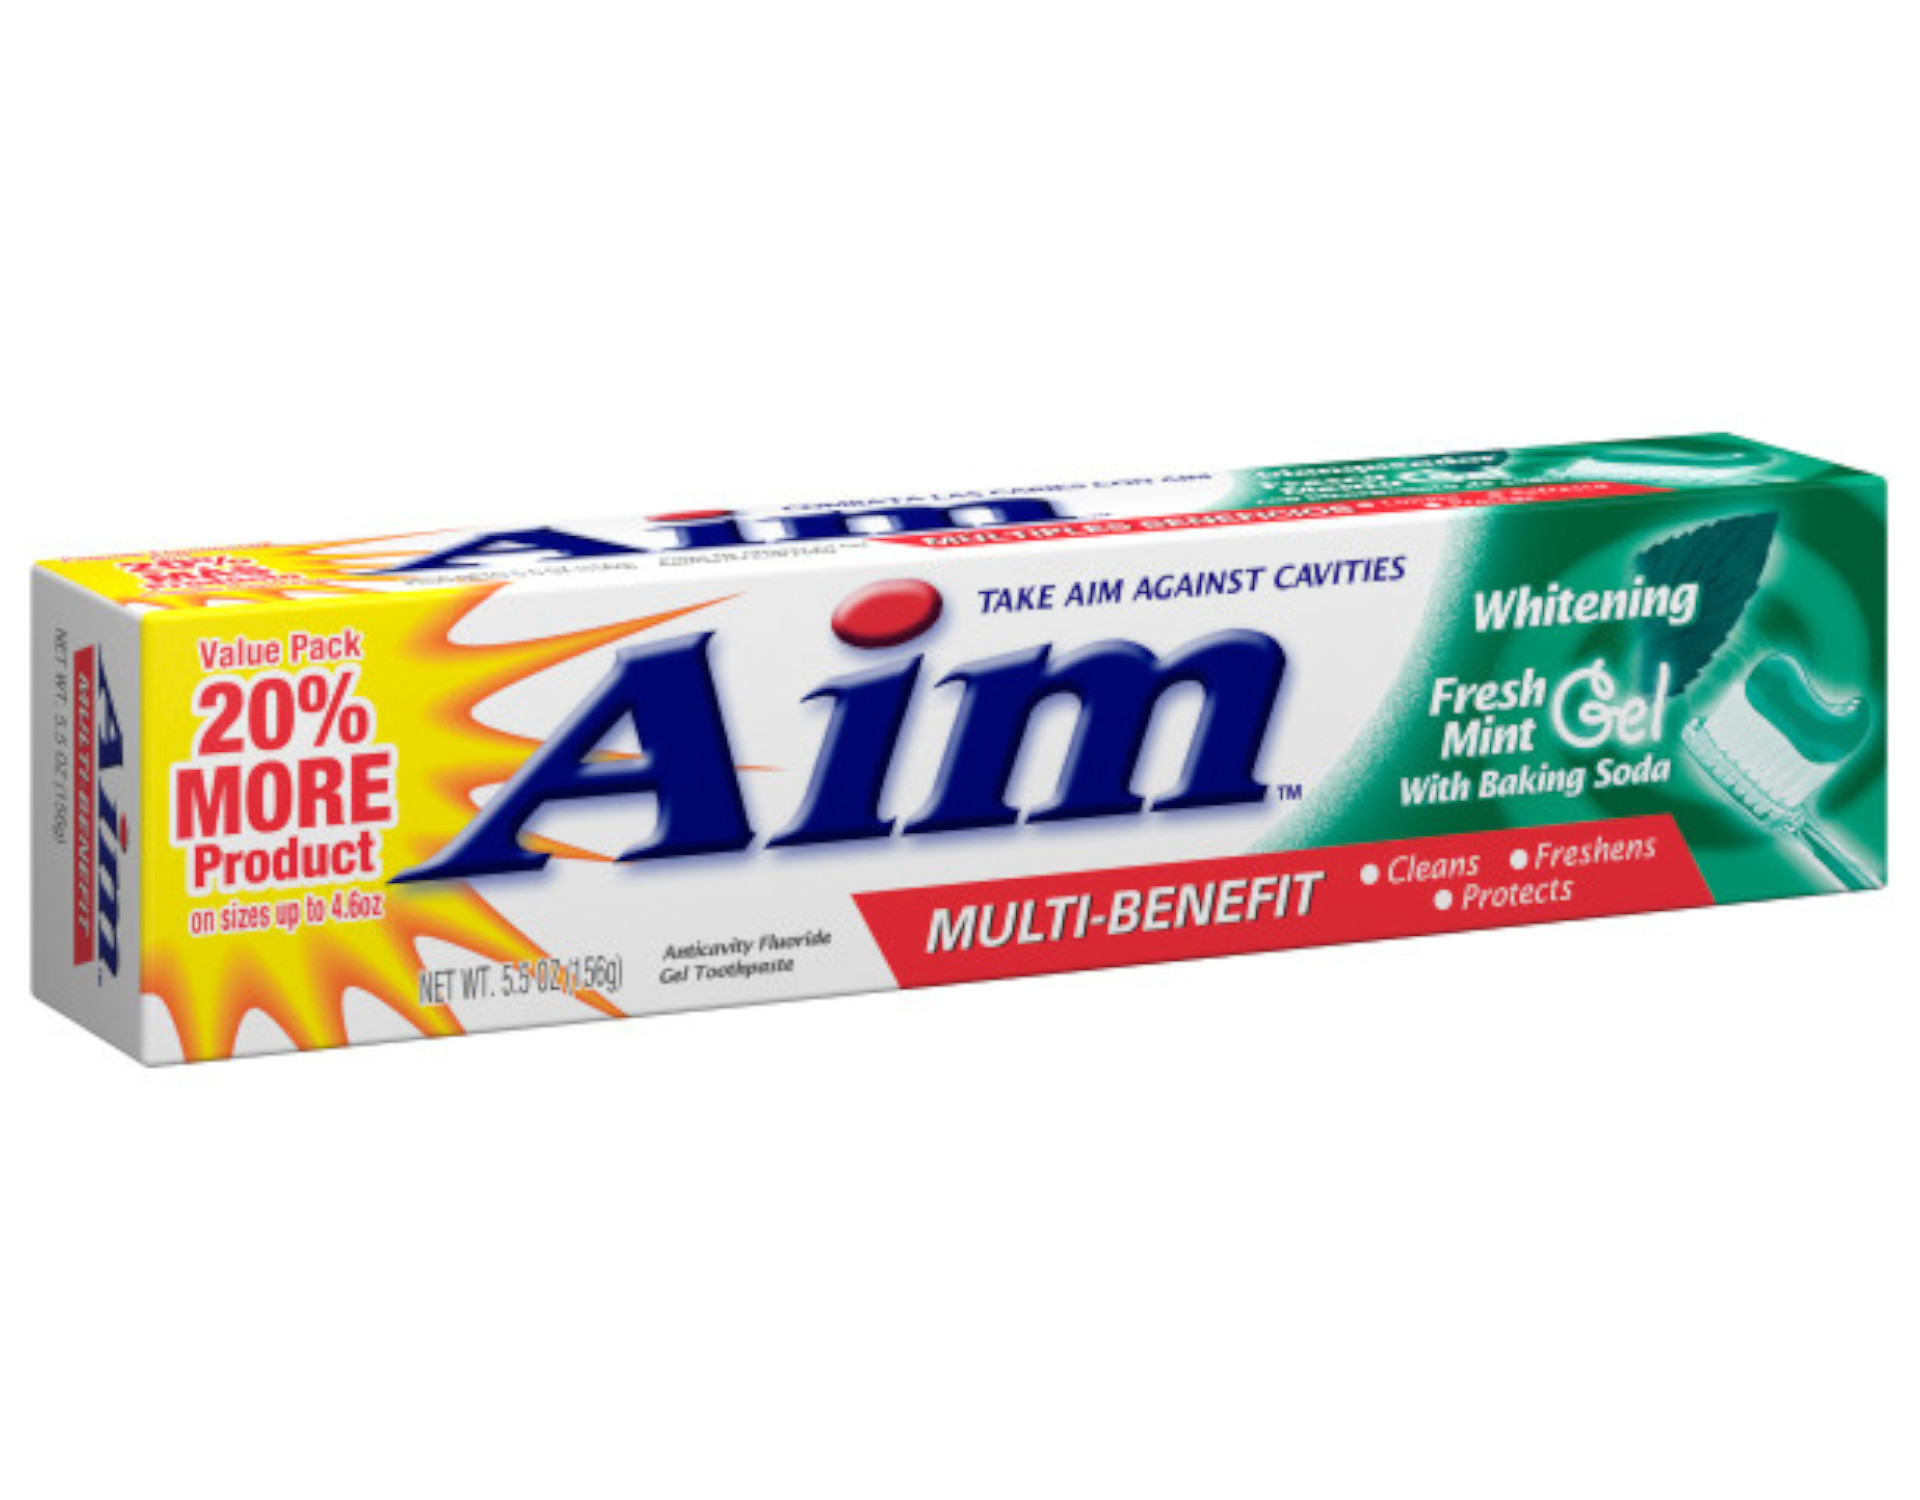 Aim Multi-Benefit Whitening Fresh Mint Gel Toothpaste with Baking Soda, 5.5 oz, 2 Pack - image 2 of 3